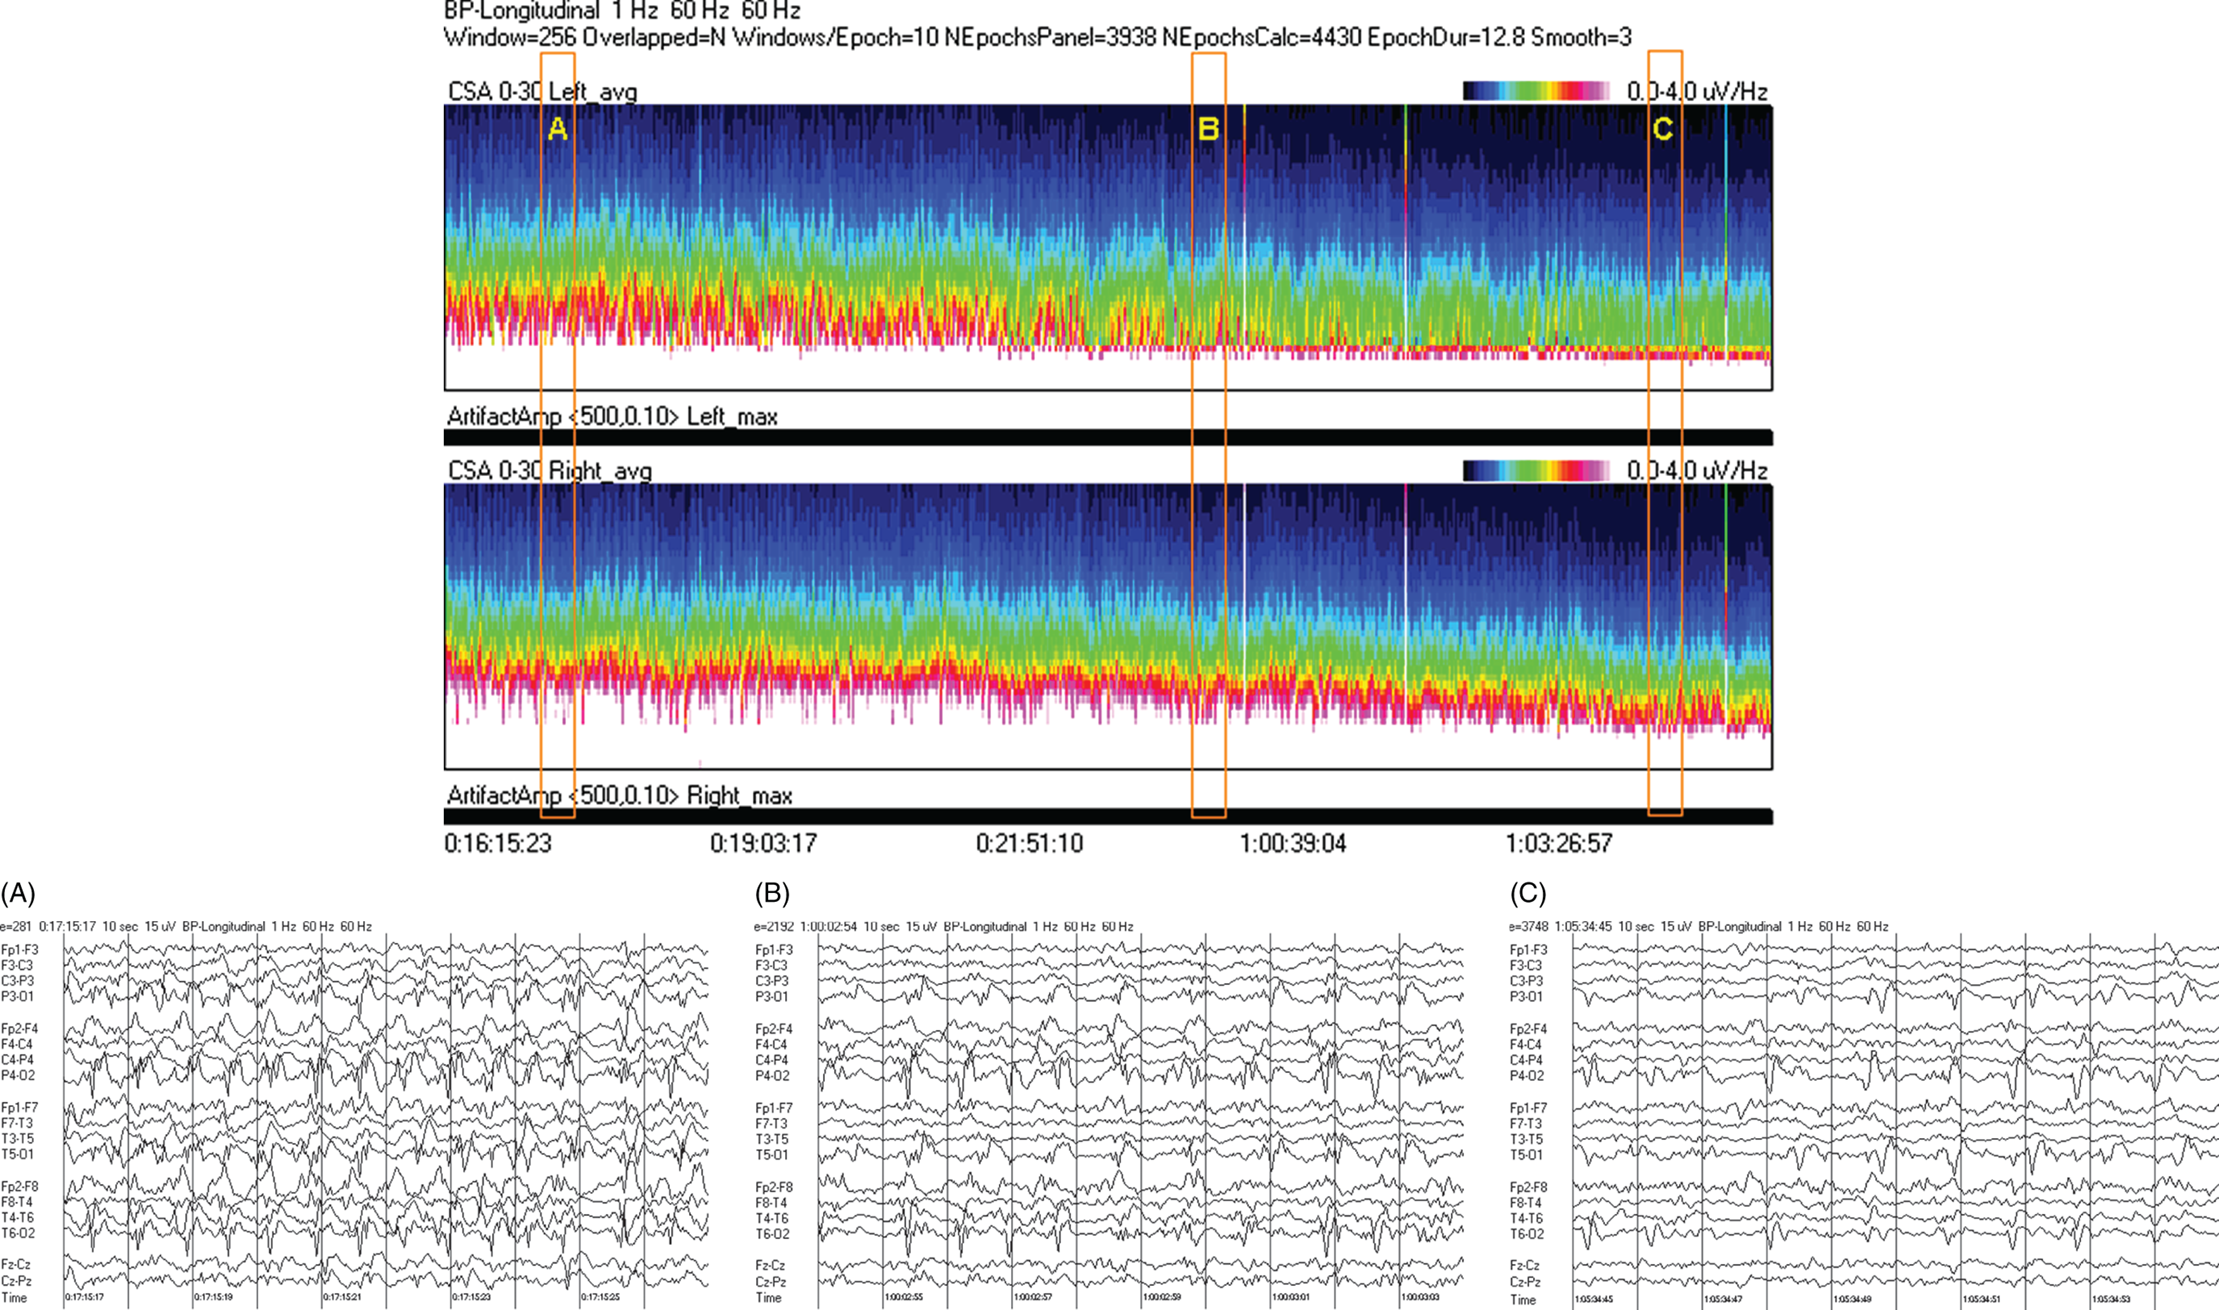 Schematic illustration of spectrogram basics, long-term trends: gradual resolution of ESE, IIC and BIPDs.